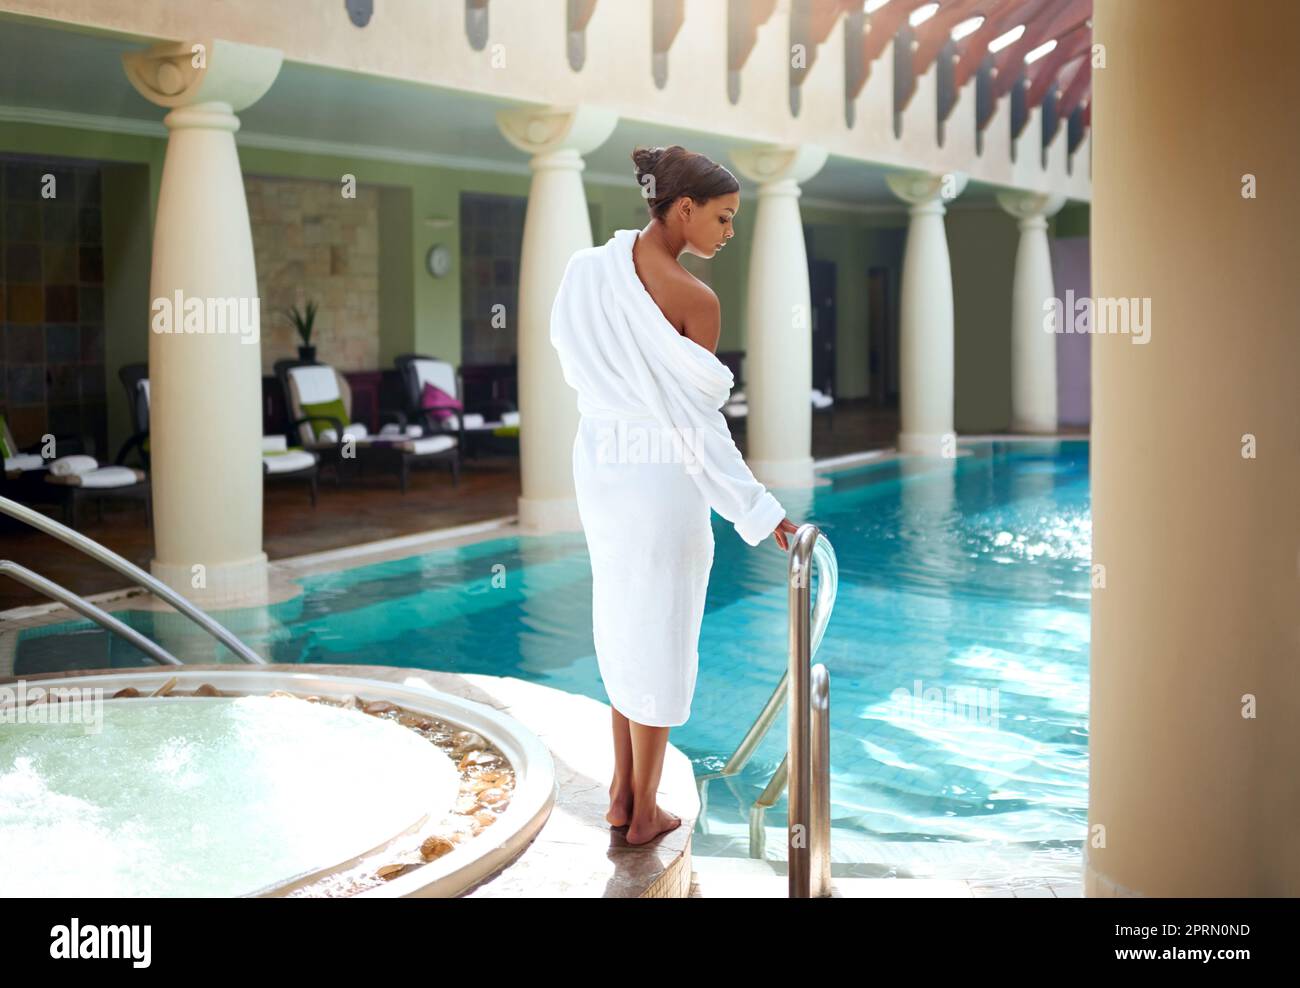 Water is just what I need to relax. an attractive young woman about to go for a relaxing swim at a spa. Stock Photo